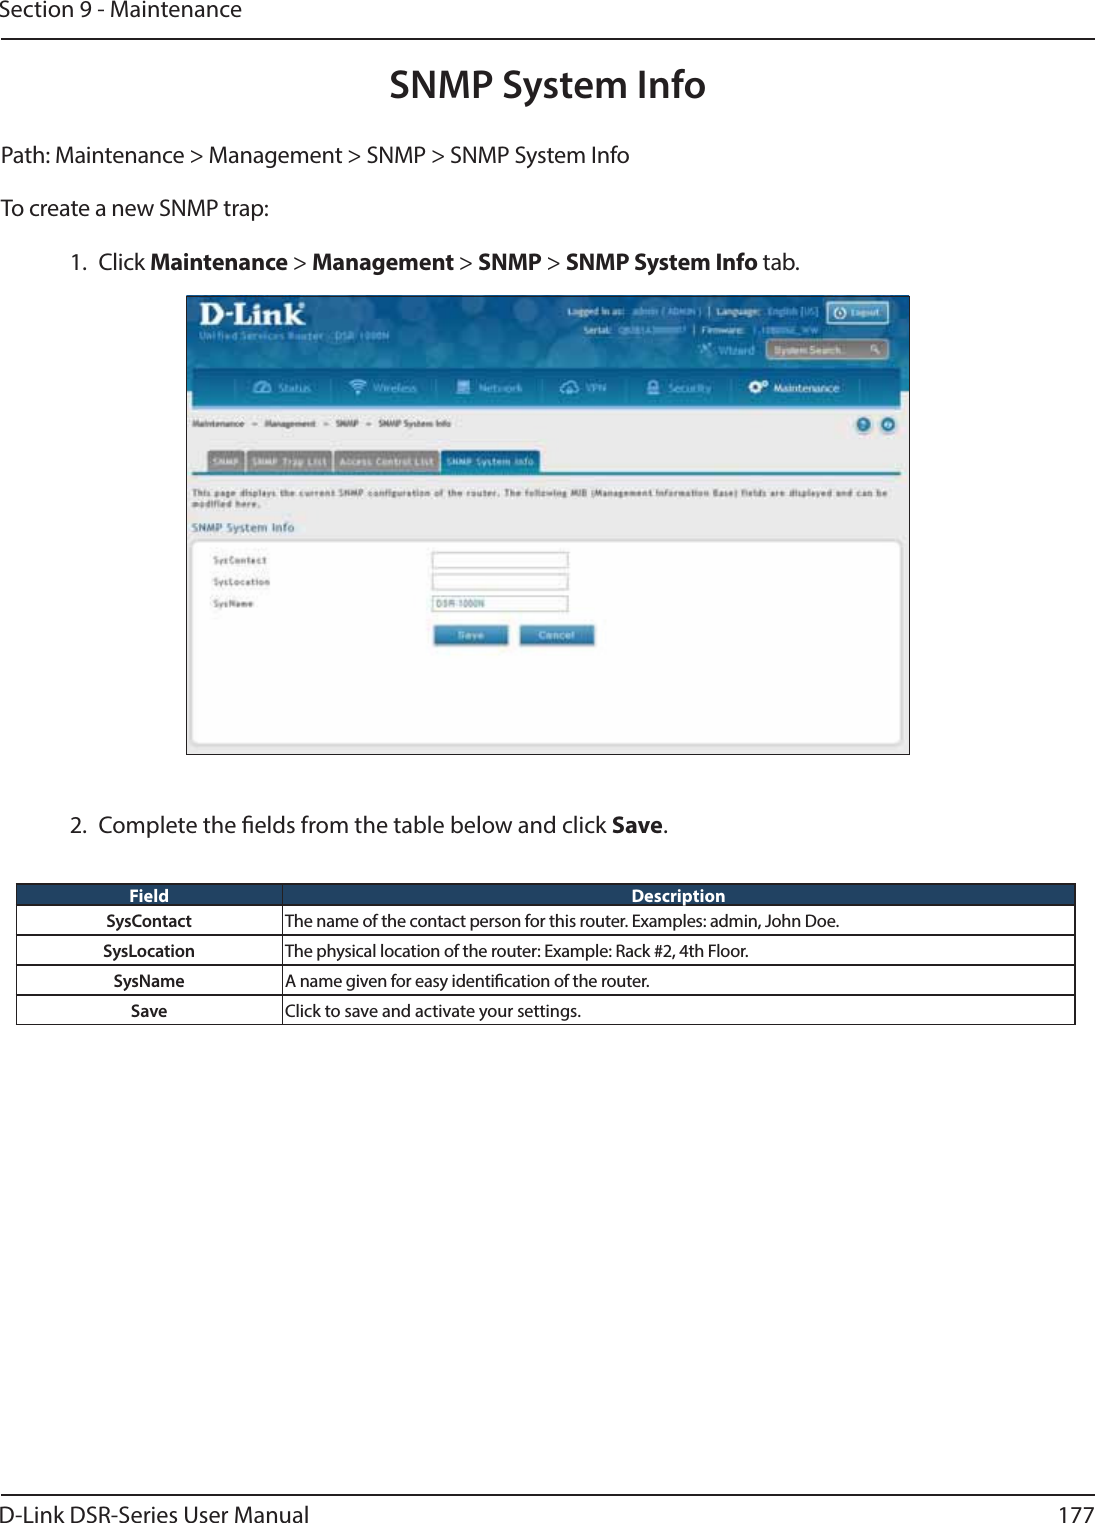 D-Link DSR-Series User Manual 177Section 9 - MaintenancePath: Maintenance &gt; Management &gt; SNMP &gt; SNMP System Info To create a new SNMP trap:1. Click Maintenance &gt; Management &gt; SNMP &gt; SNMP System Info tab.SNMP System Info2.  Complete the elds from the table below and click Save.Field DescriptionSysContact The name of the contact person for this router. Examples: admin, John Doe.SysLocation The physical location of the router: Example: Rack #2, 4th Floor.SysName A name given for easy identication of the router.Save Click to save and activate your settings.